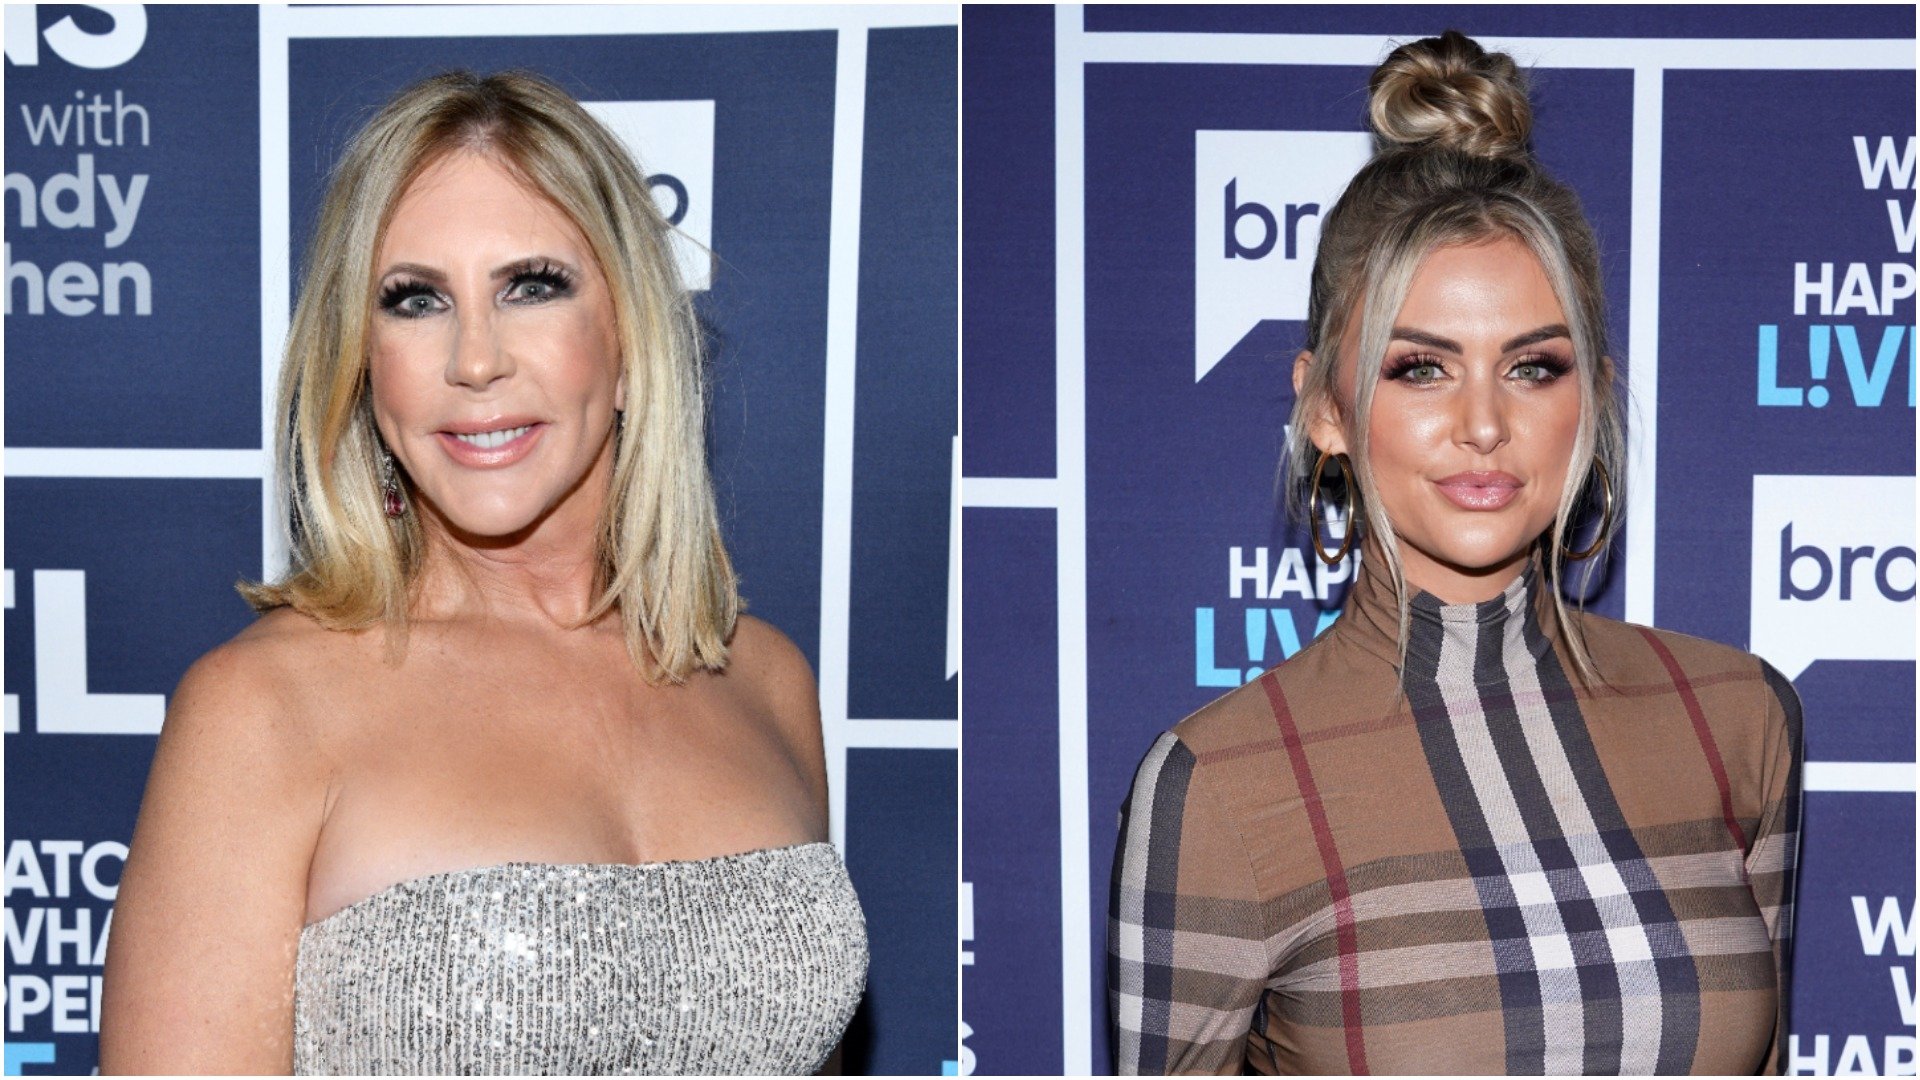 Vicki Gunvalson from RHOC and Lala Kent from Vanderpump Rules visit WWHL